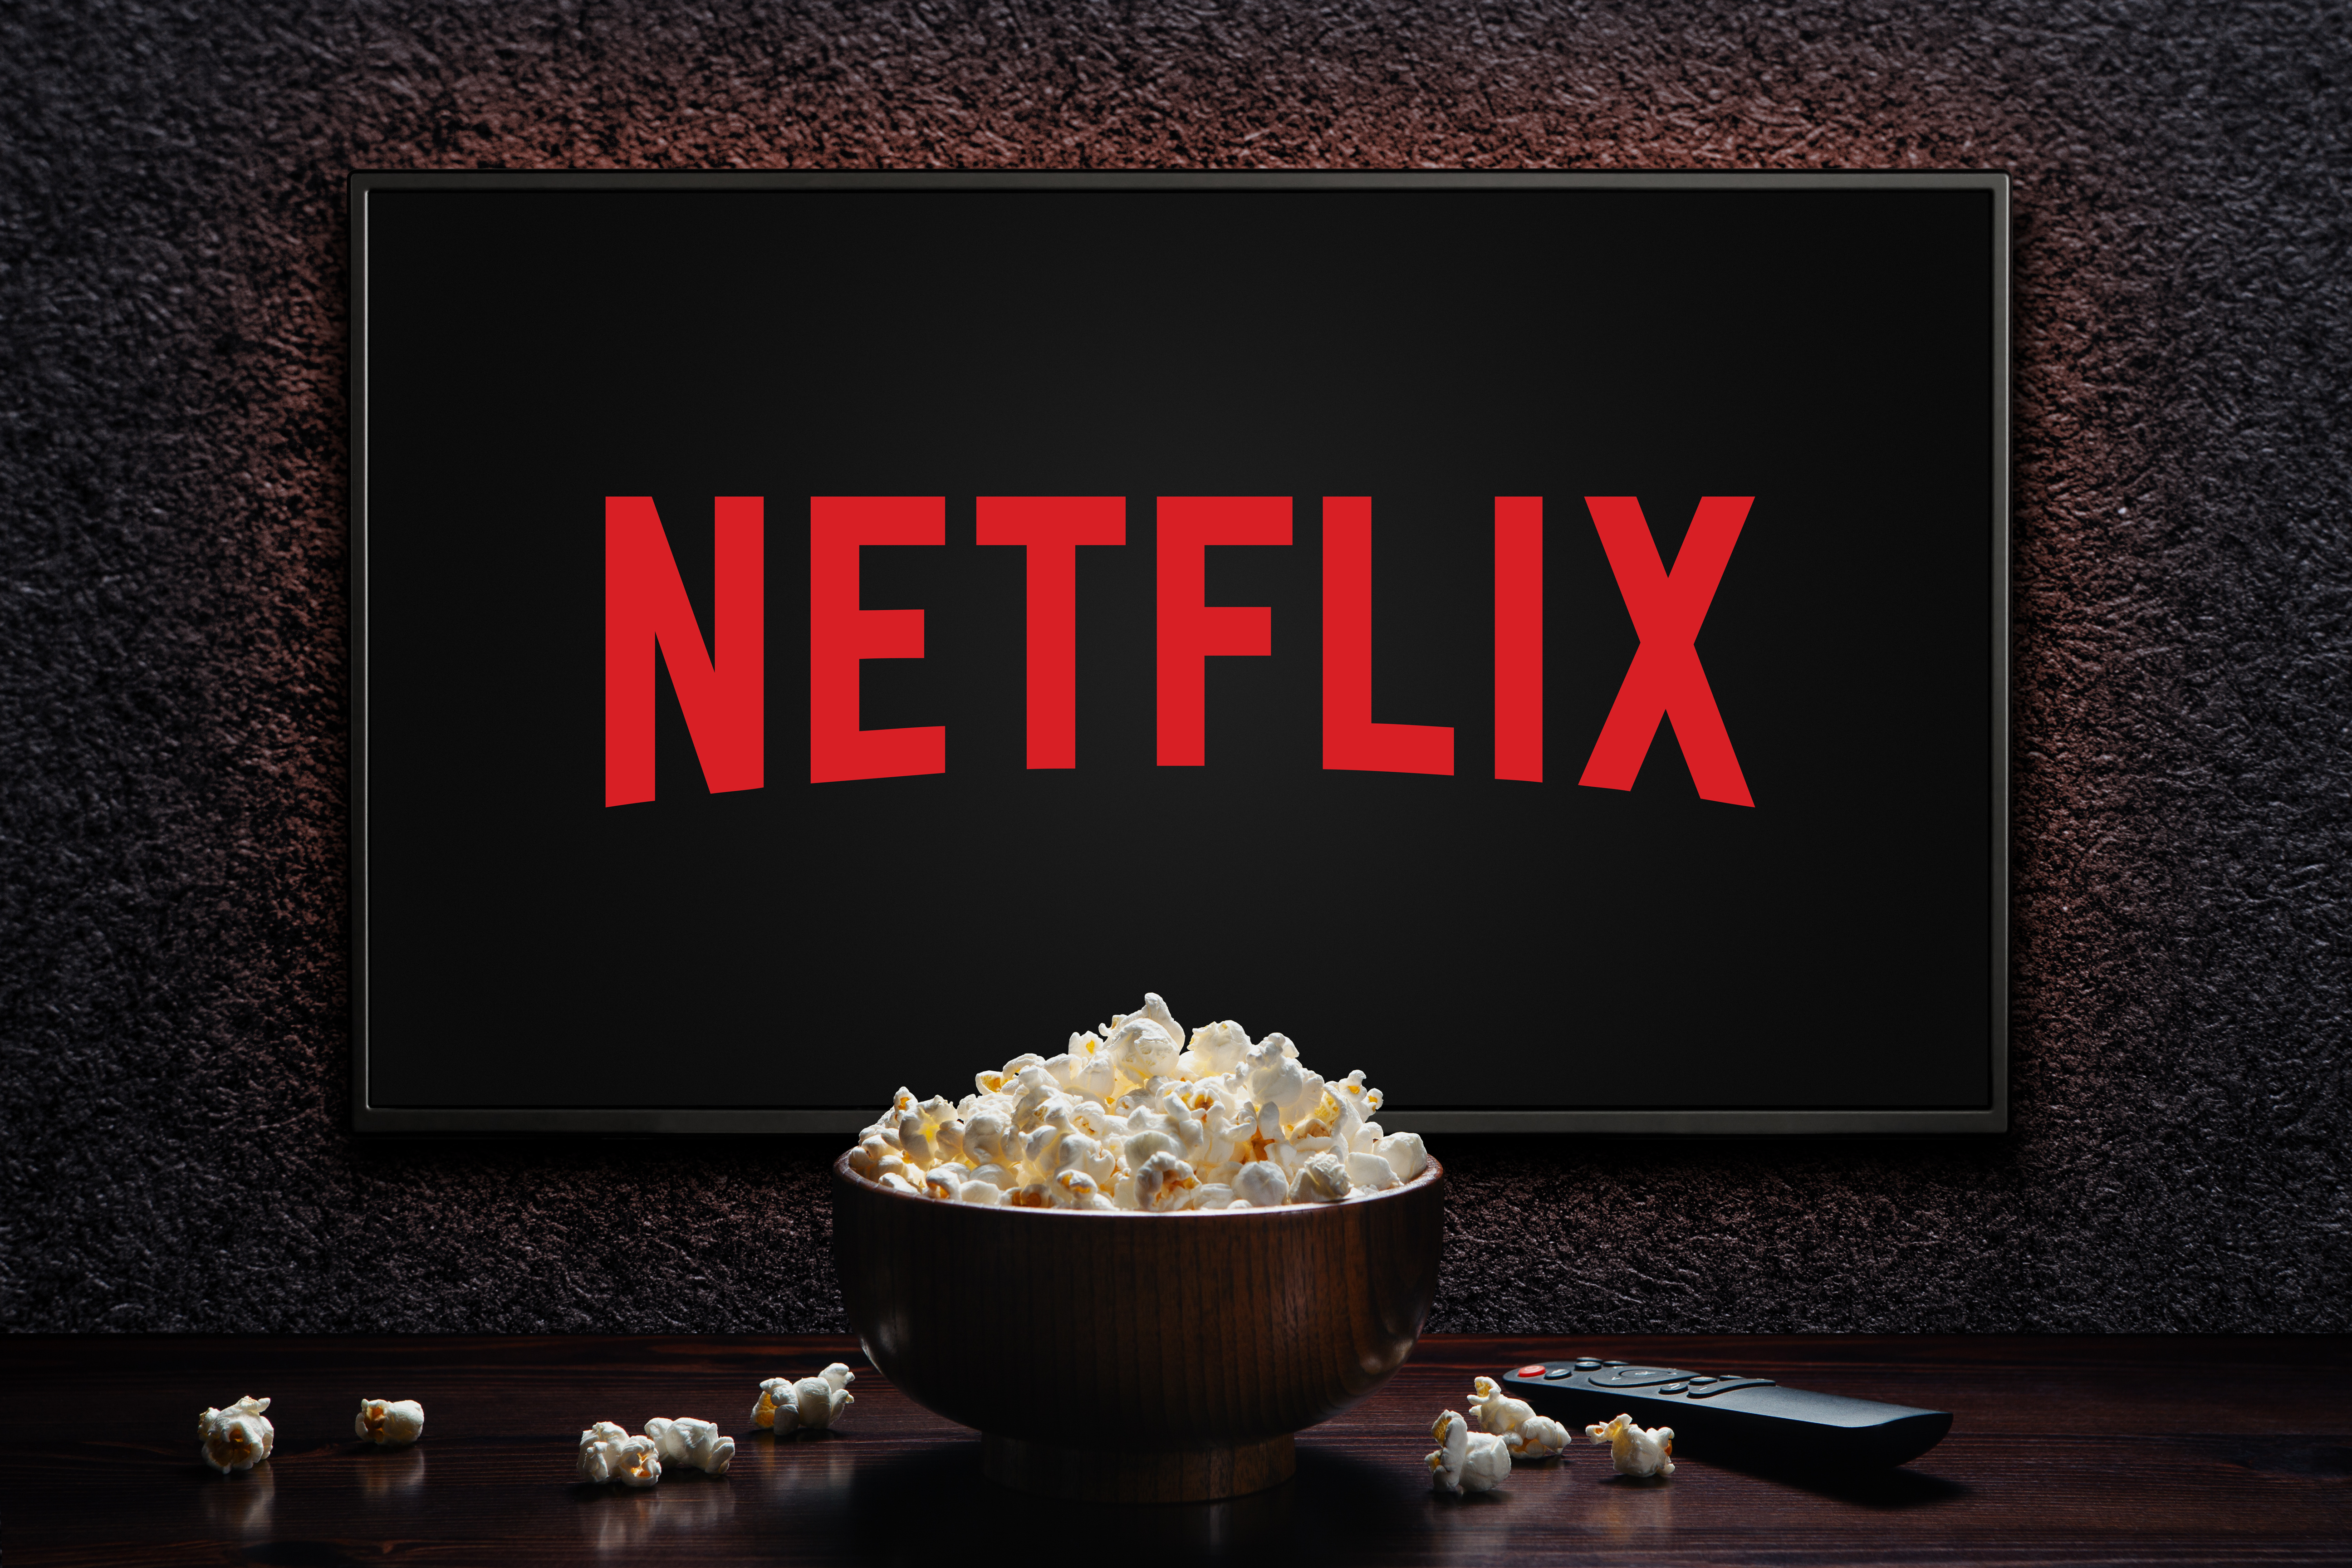 Netflix logo on TV with popcorn bowl and reomote control on the table. Moscow, Russia - November 29, 2022.